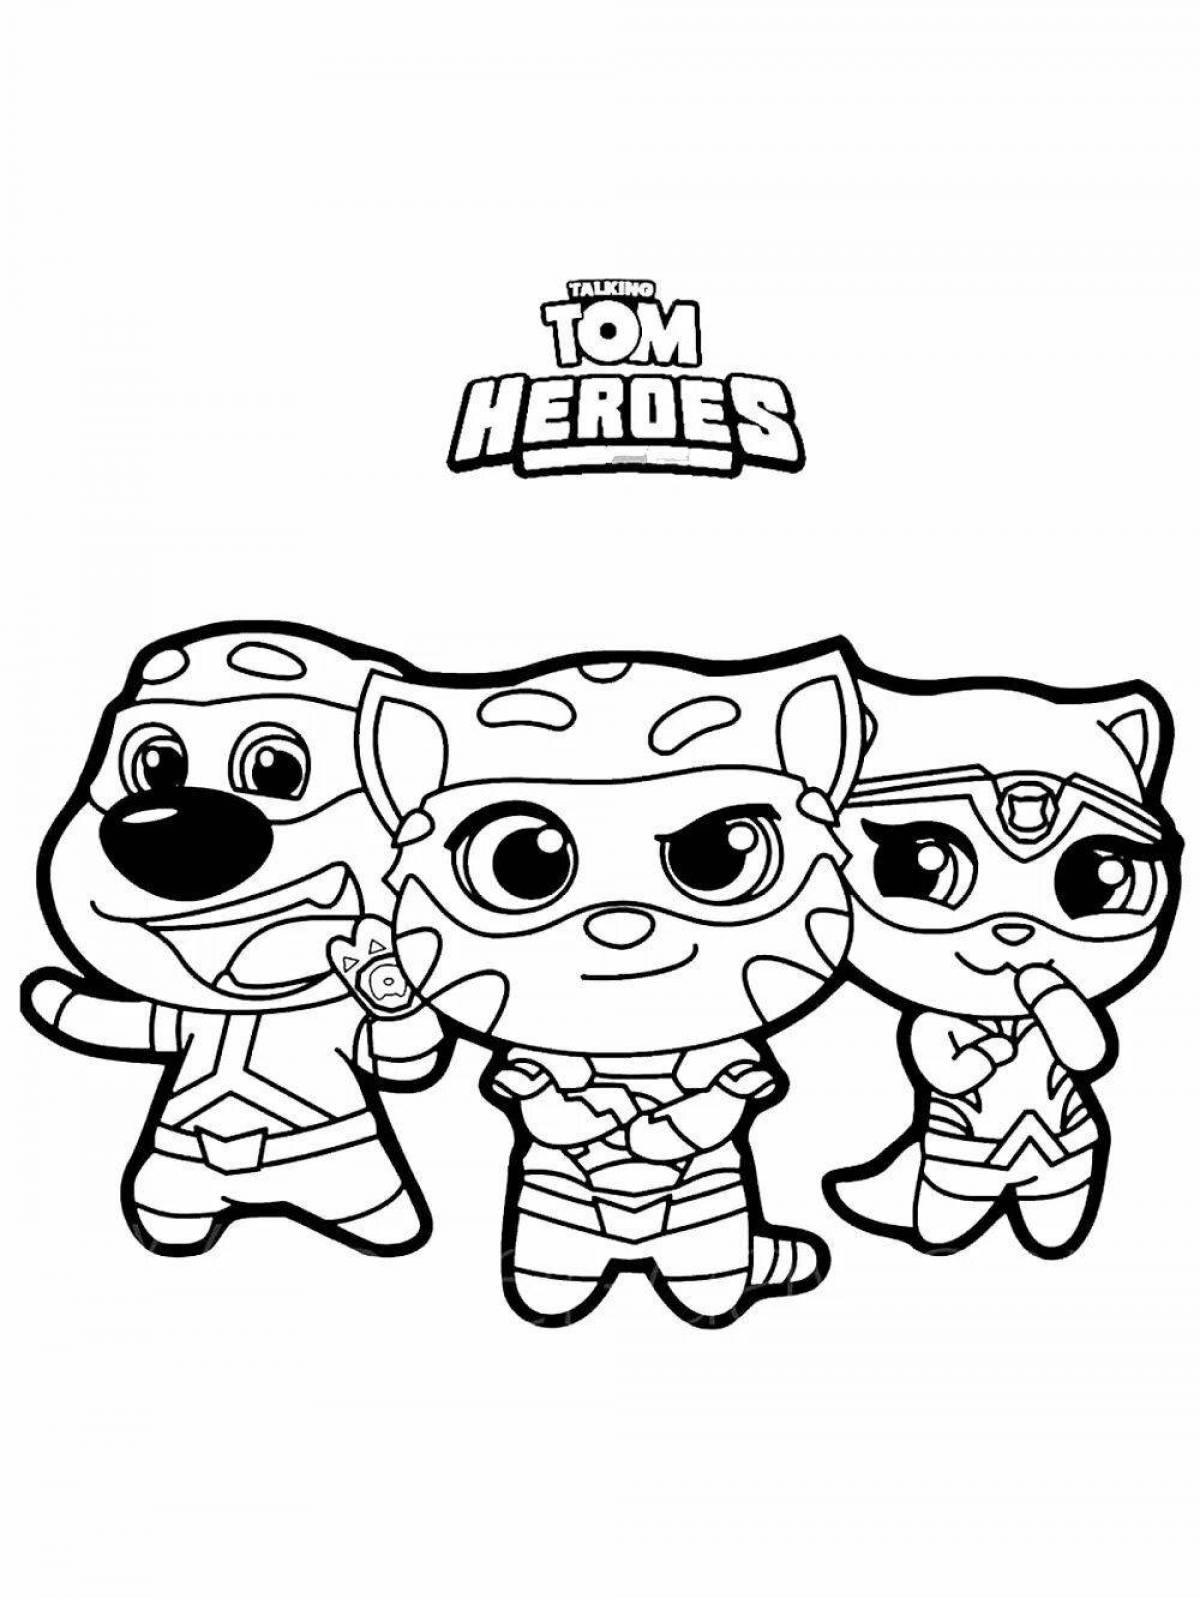 Colorful tom and ben coloring pages